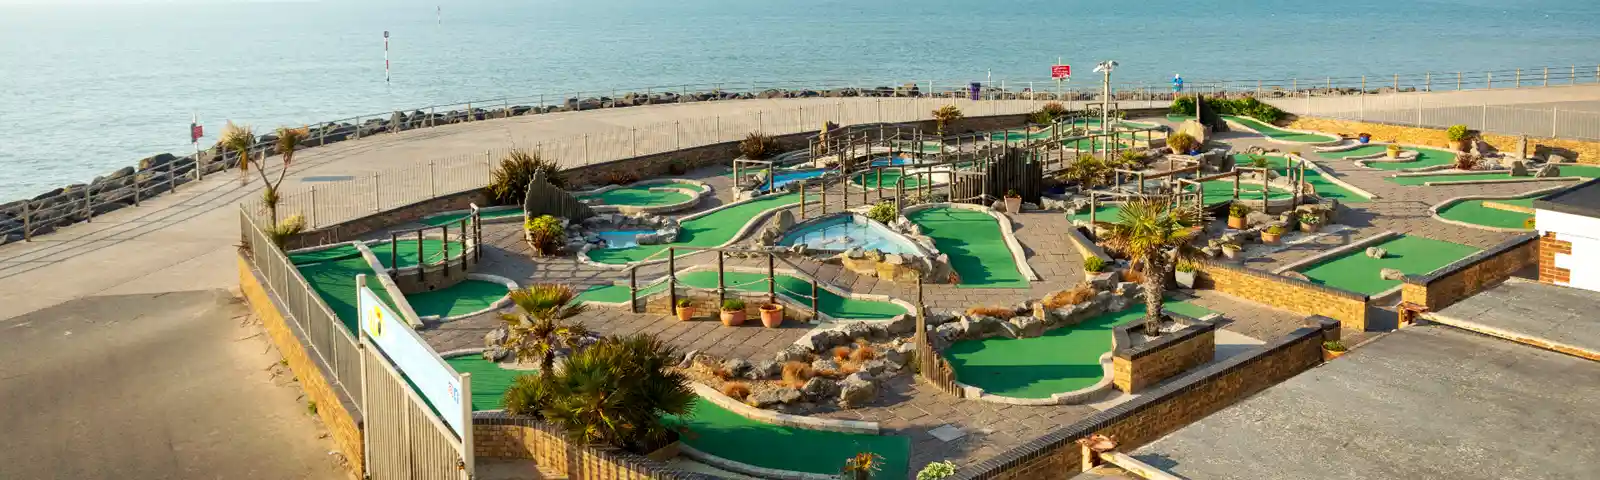 EDITED Strokes Adventure Golf, Margate By Alex Hare 2023 Credit Tourism @ Thanet District Council MK4 8358